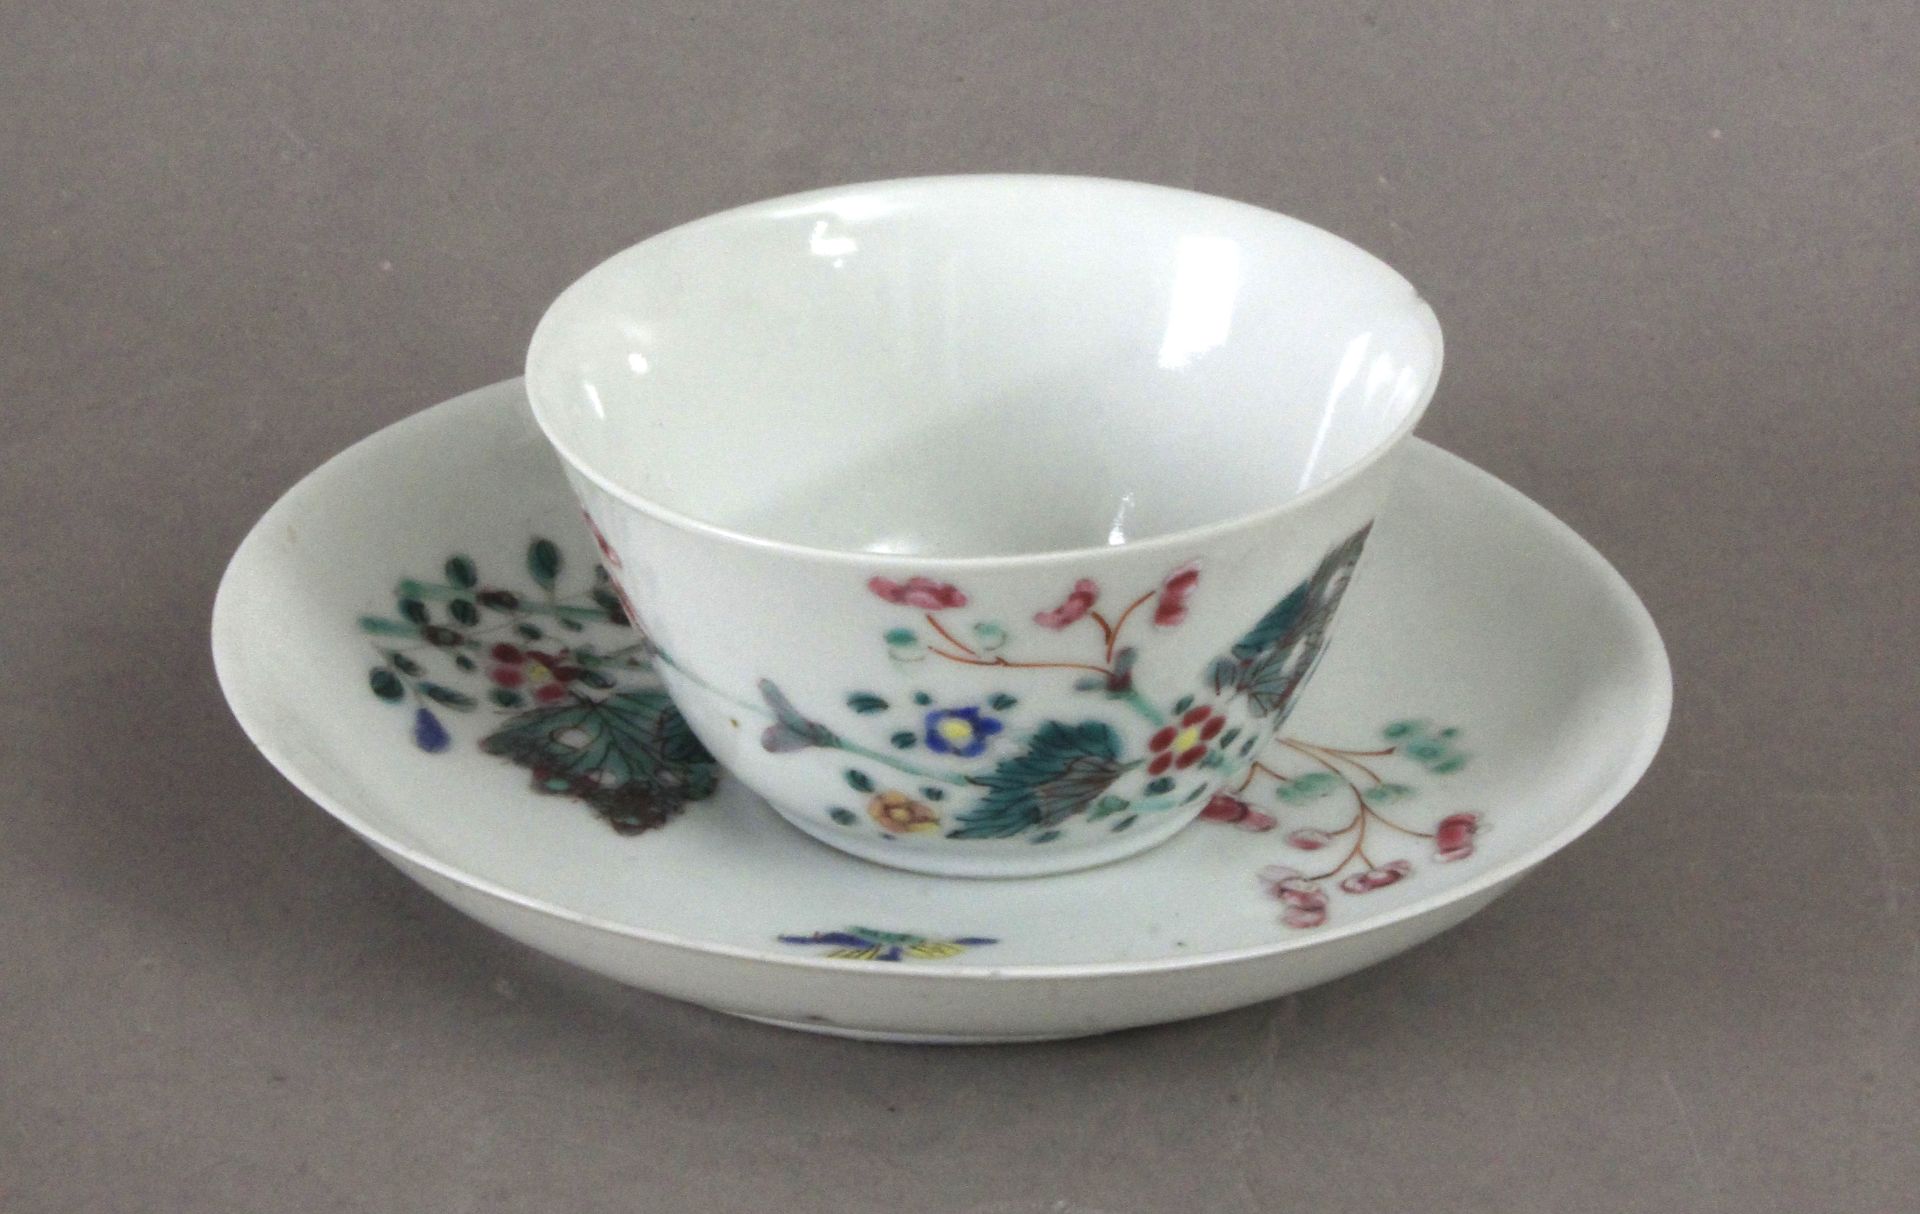 18th century Chinese cup and saucer in Famille Rose porcelain